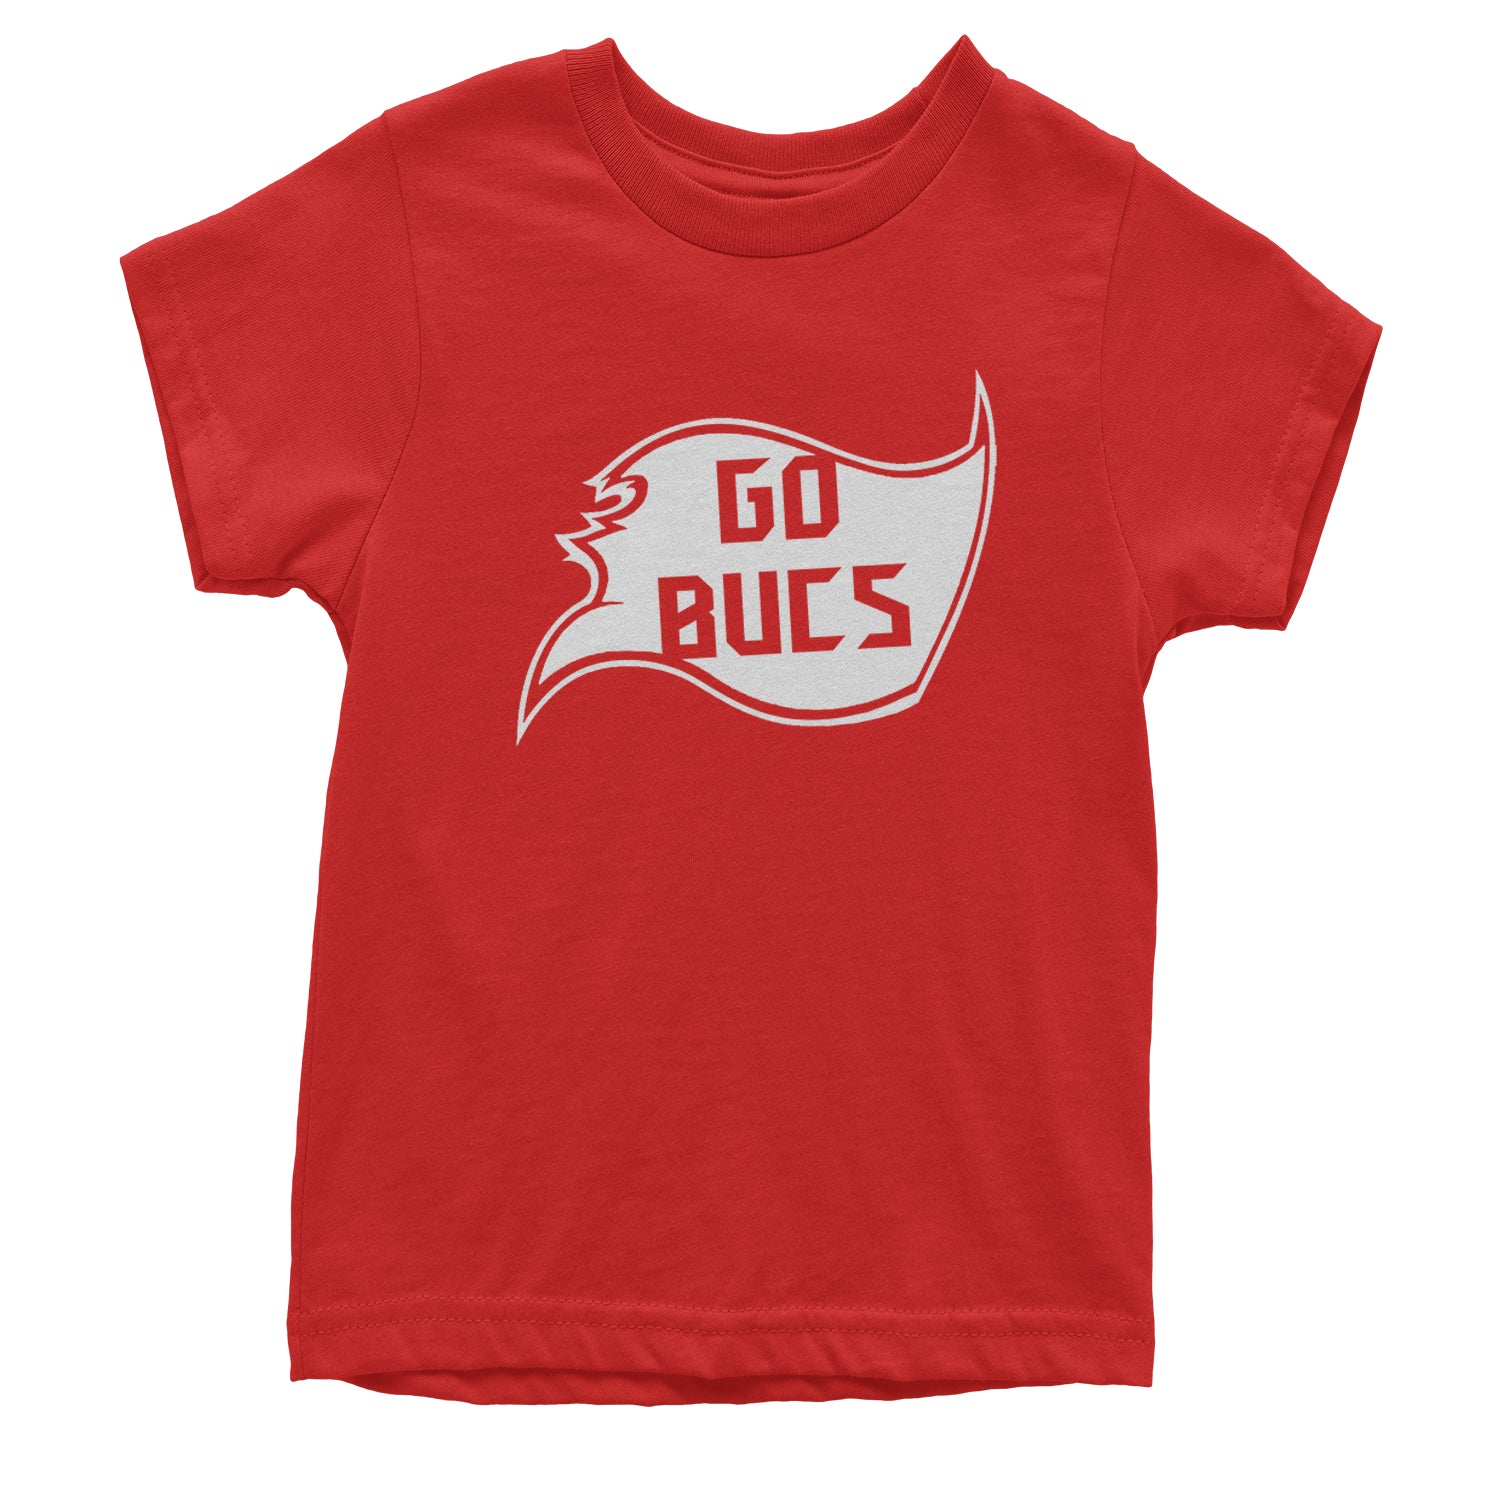 Go Bucs Buccaneers Youth T-shirt ball, flag, foot, raise, tampa, the by Expression Tees